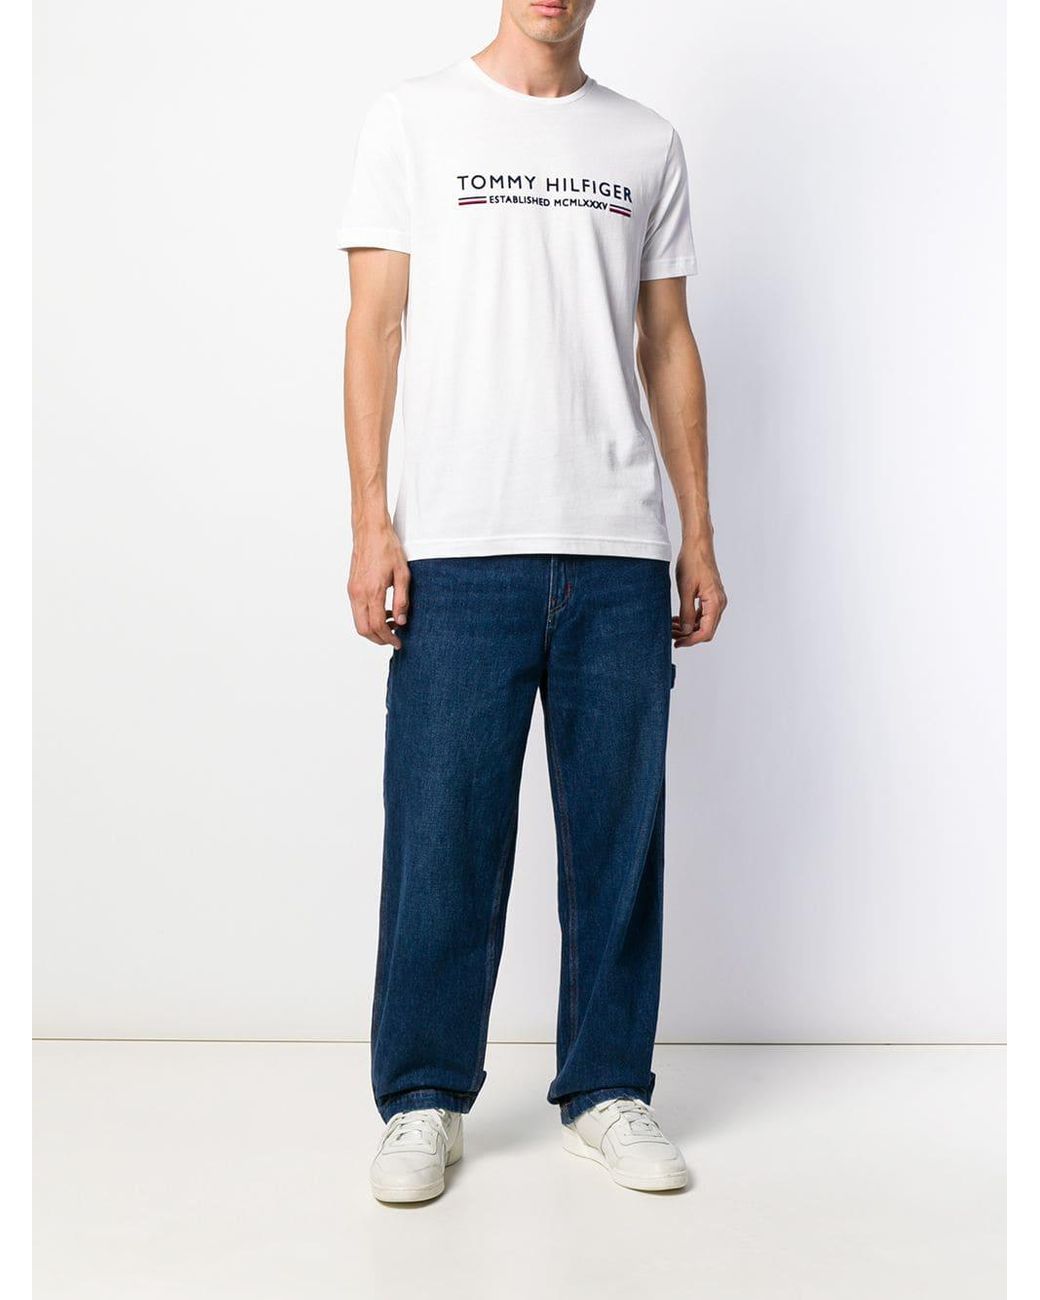 Tommy Hilfiger Mcmlxxxv T-shirt in White for Men | Lyst